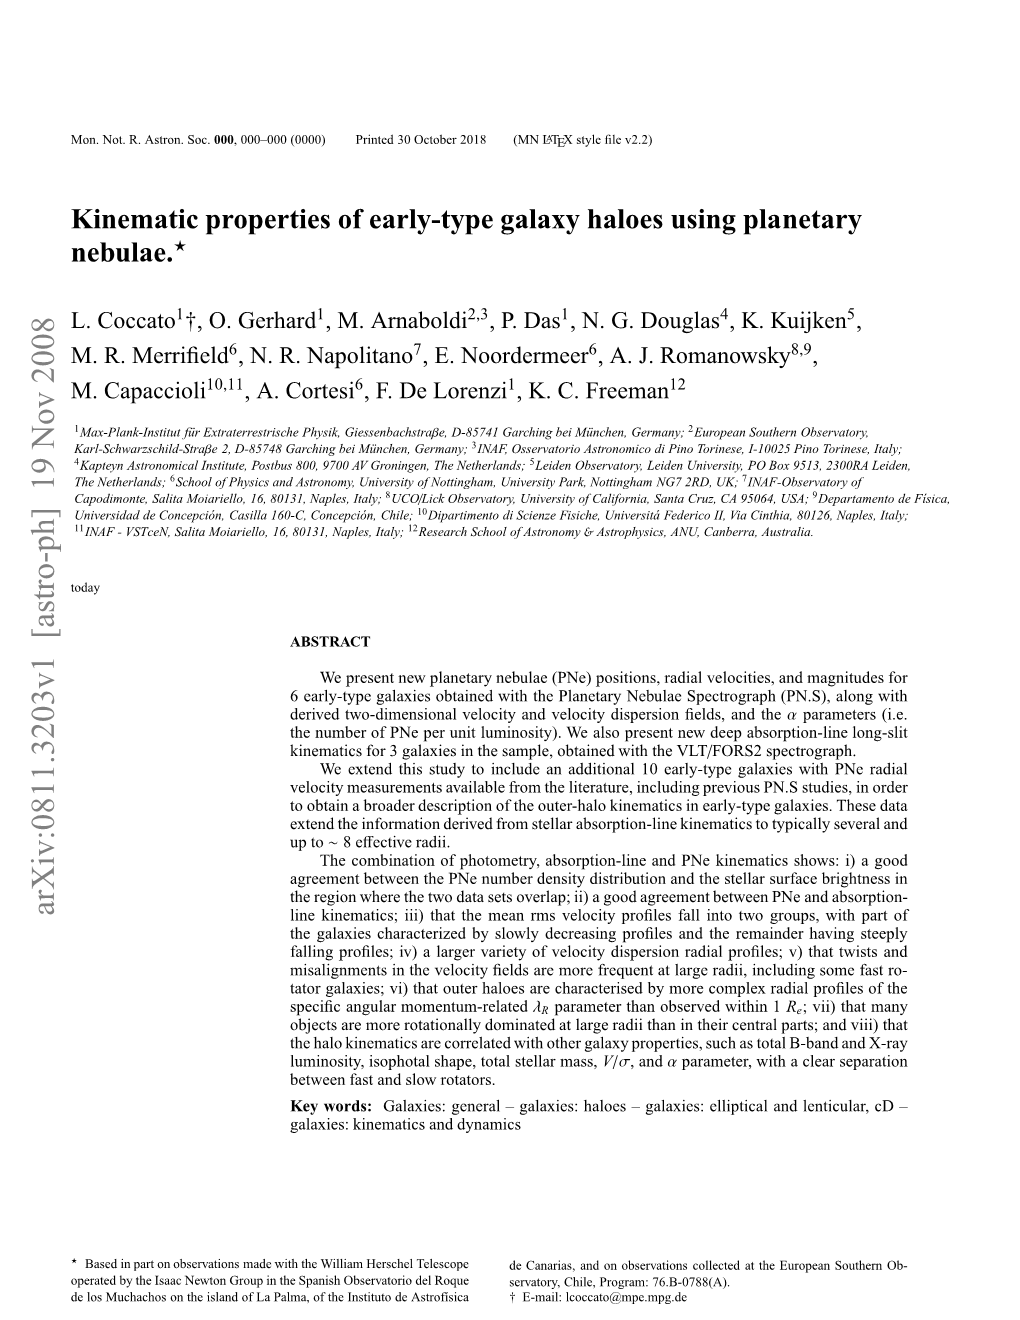 Kinematic Properties of Early-Type Galaxy Haloes Using Planetary